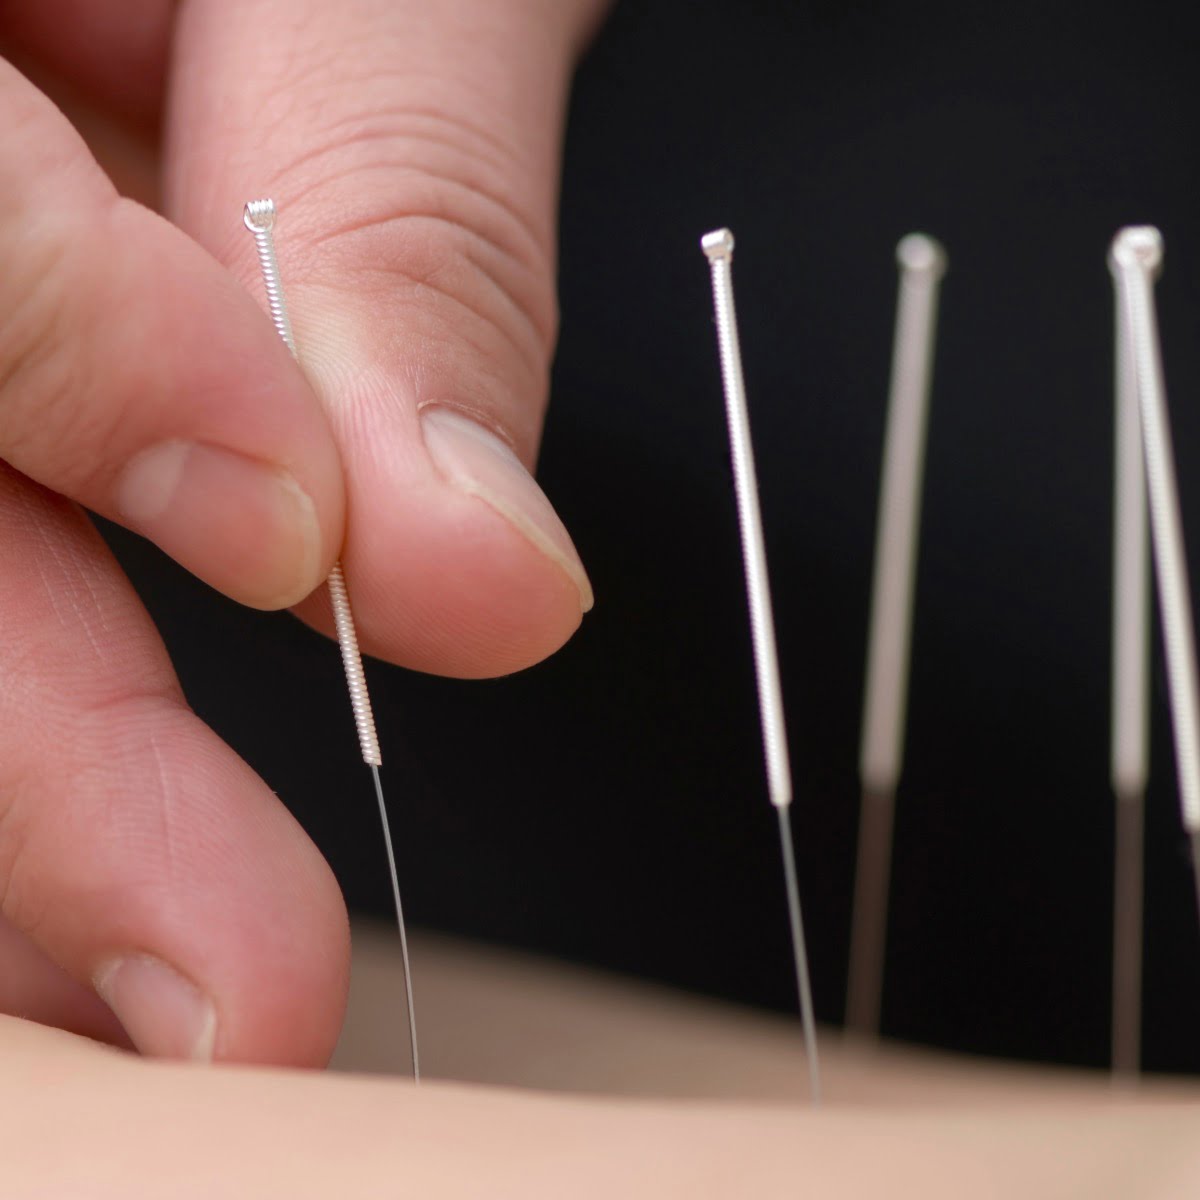 Chinese acupuncture